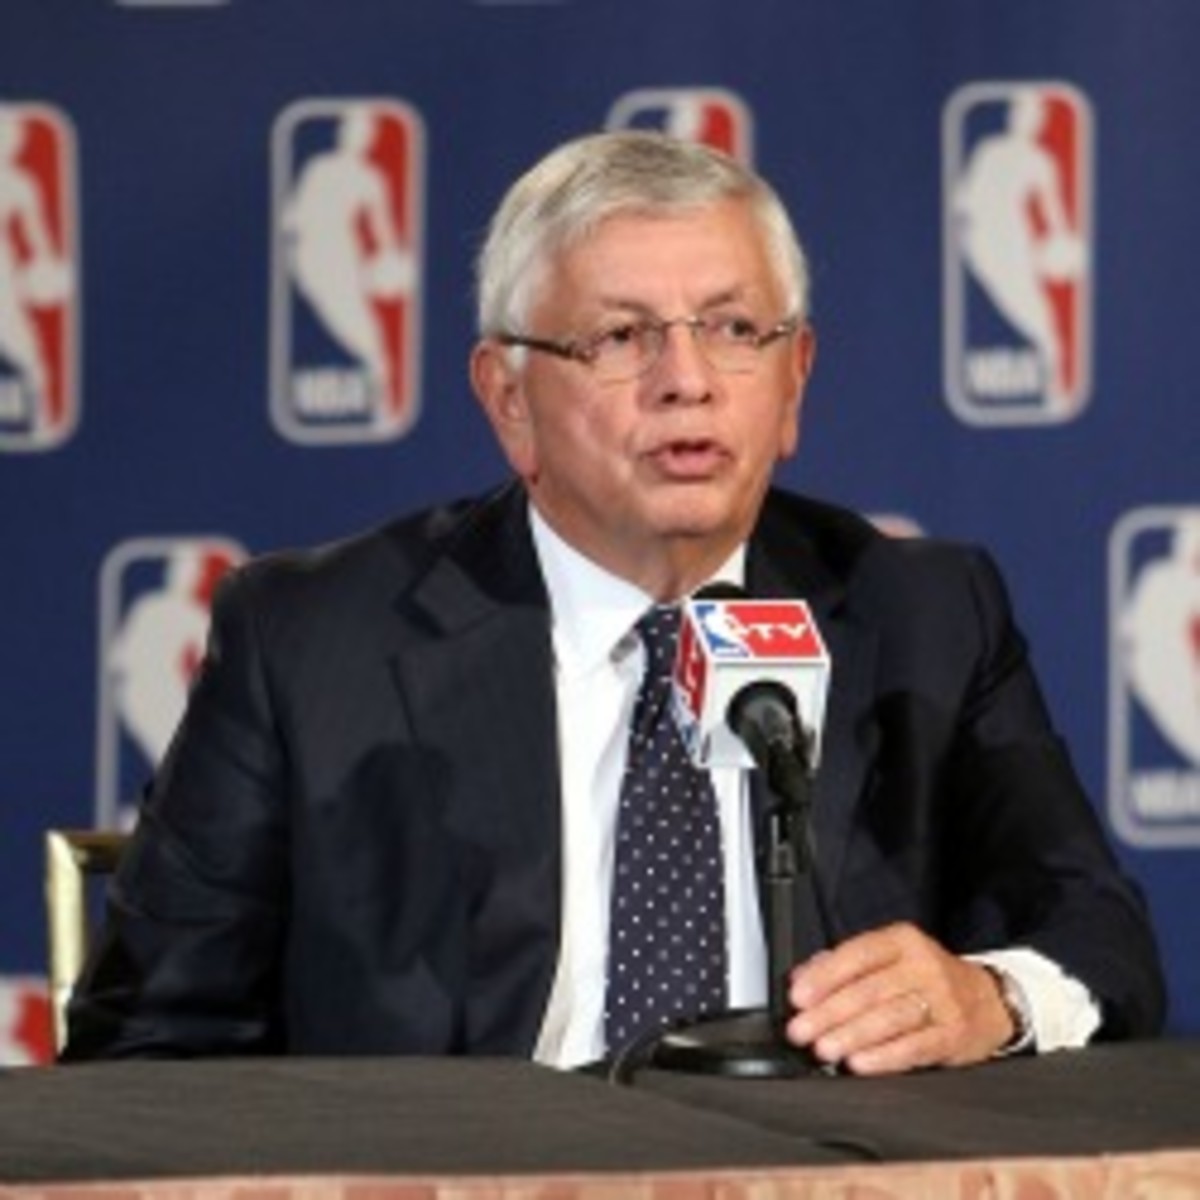 NBA commissioner David Stern met with  billionaire Ron Burkle, who hopes to purchase the Kings and keep them in Sacramento, in New York City on Thursday. (Alex Trautwig/Getty Images)